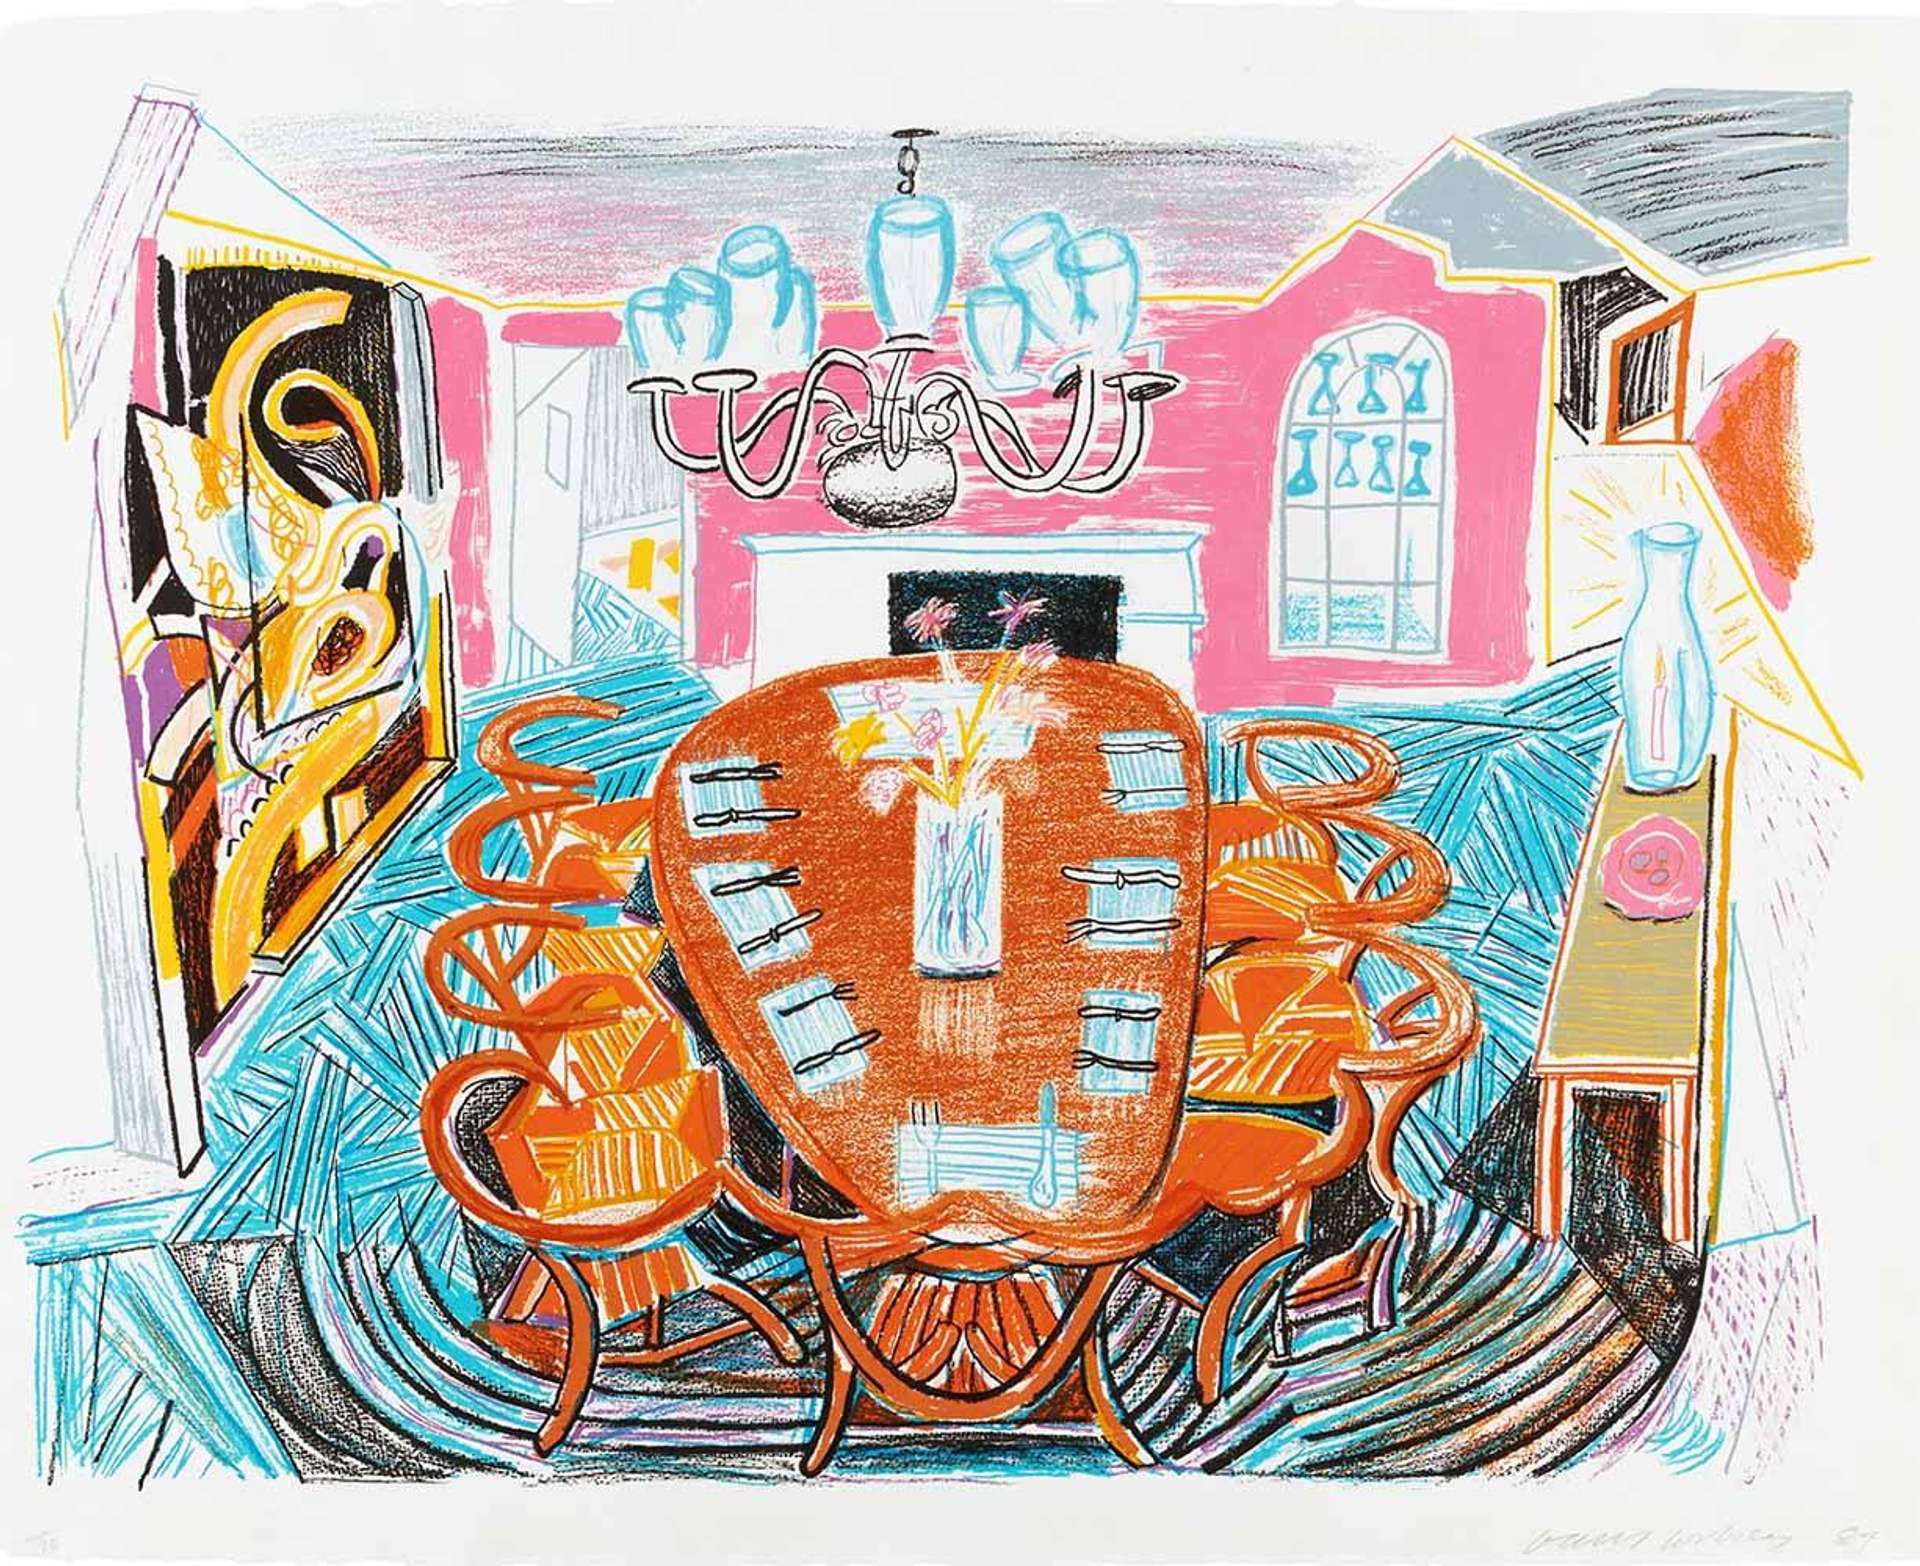 David Hockney's Tyler Dining Room. A lithographic print of a dining room interior with pink walls, blue flooring, a set table and abstract wall art.